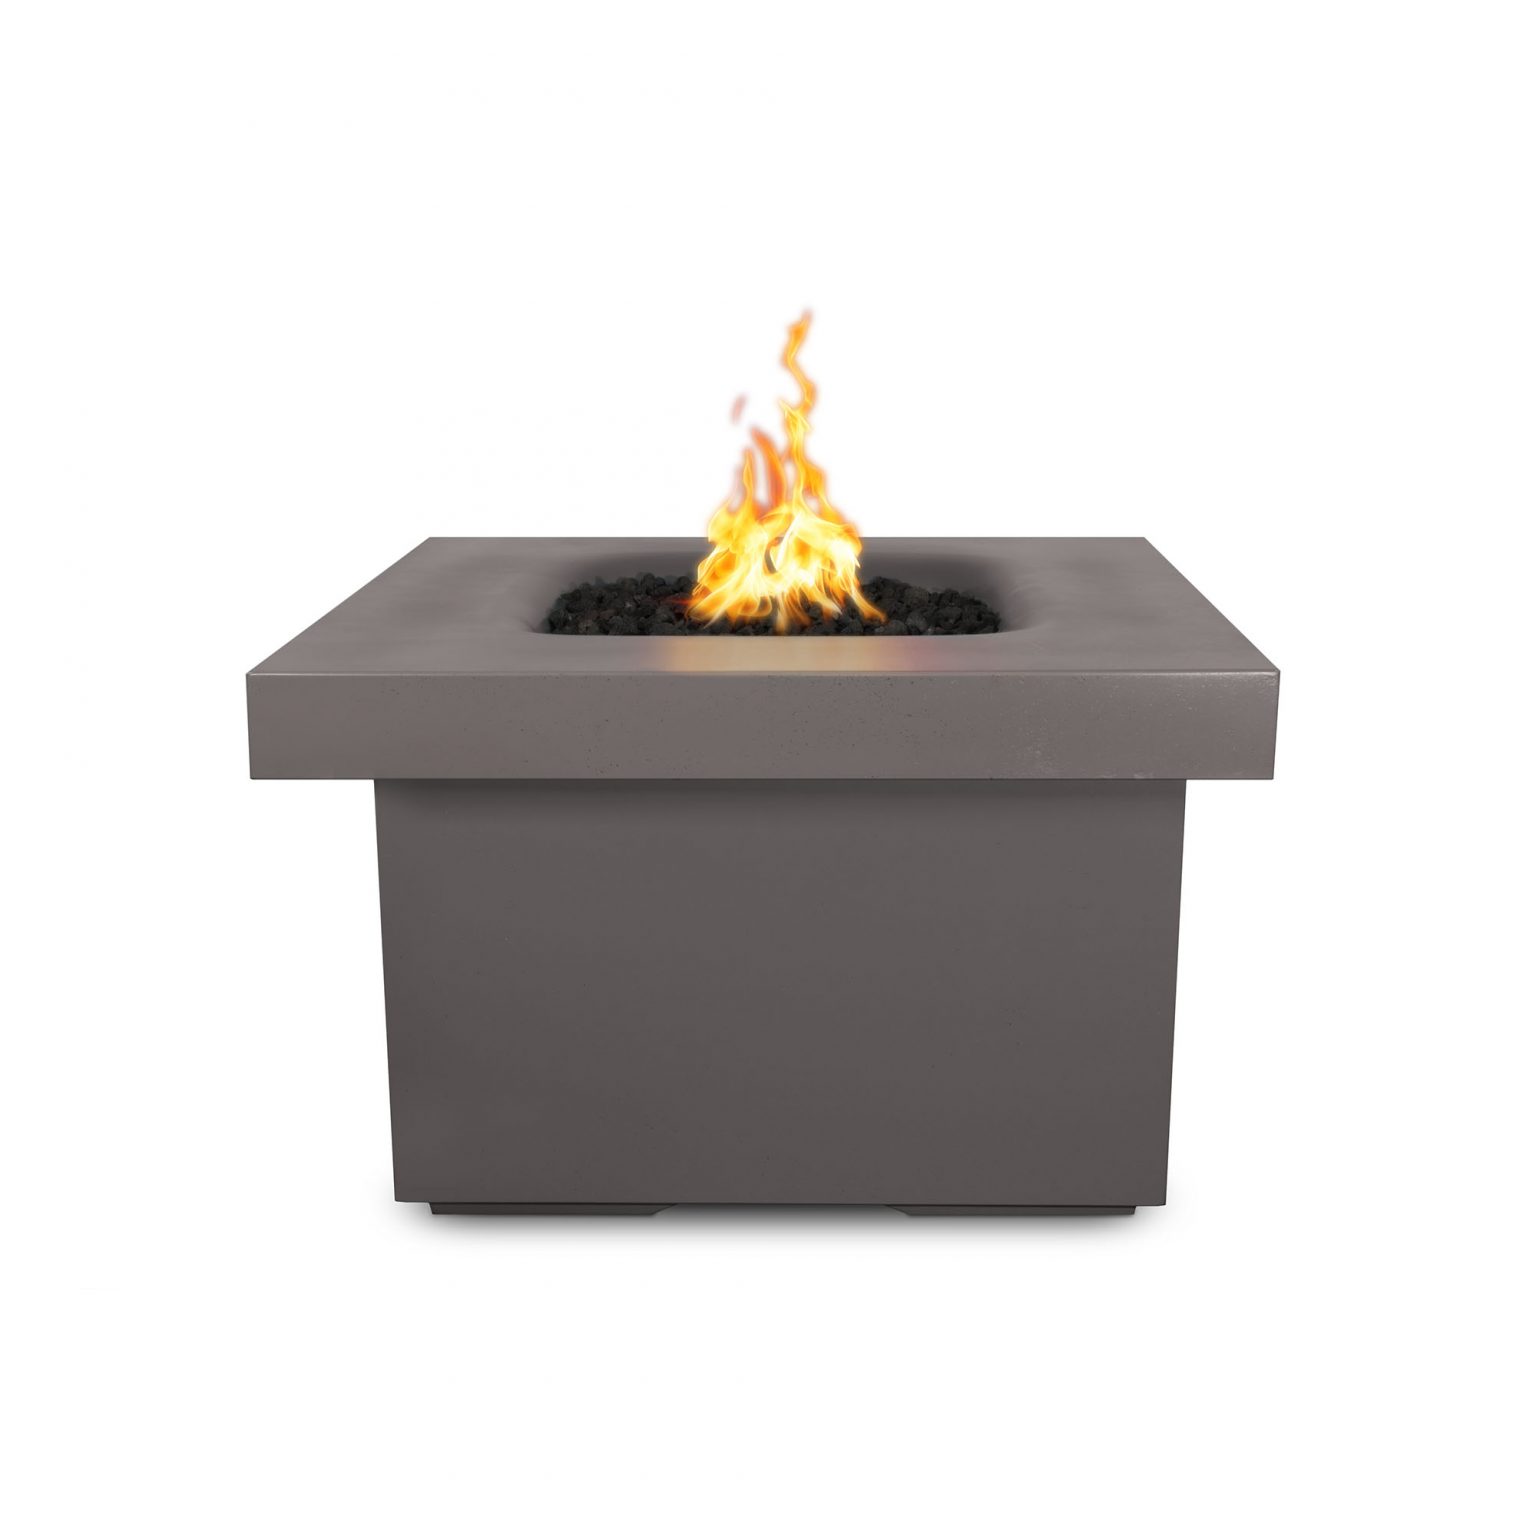 Square Gas Fire Pit Table the "Ramona" by The Outdoor Plus (TOP Ignition Options: Match Lit Ignition)